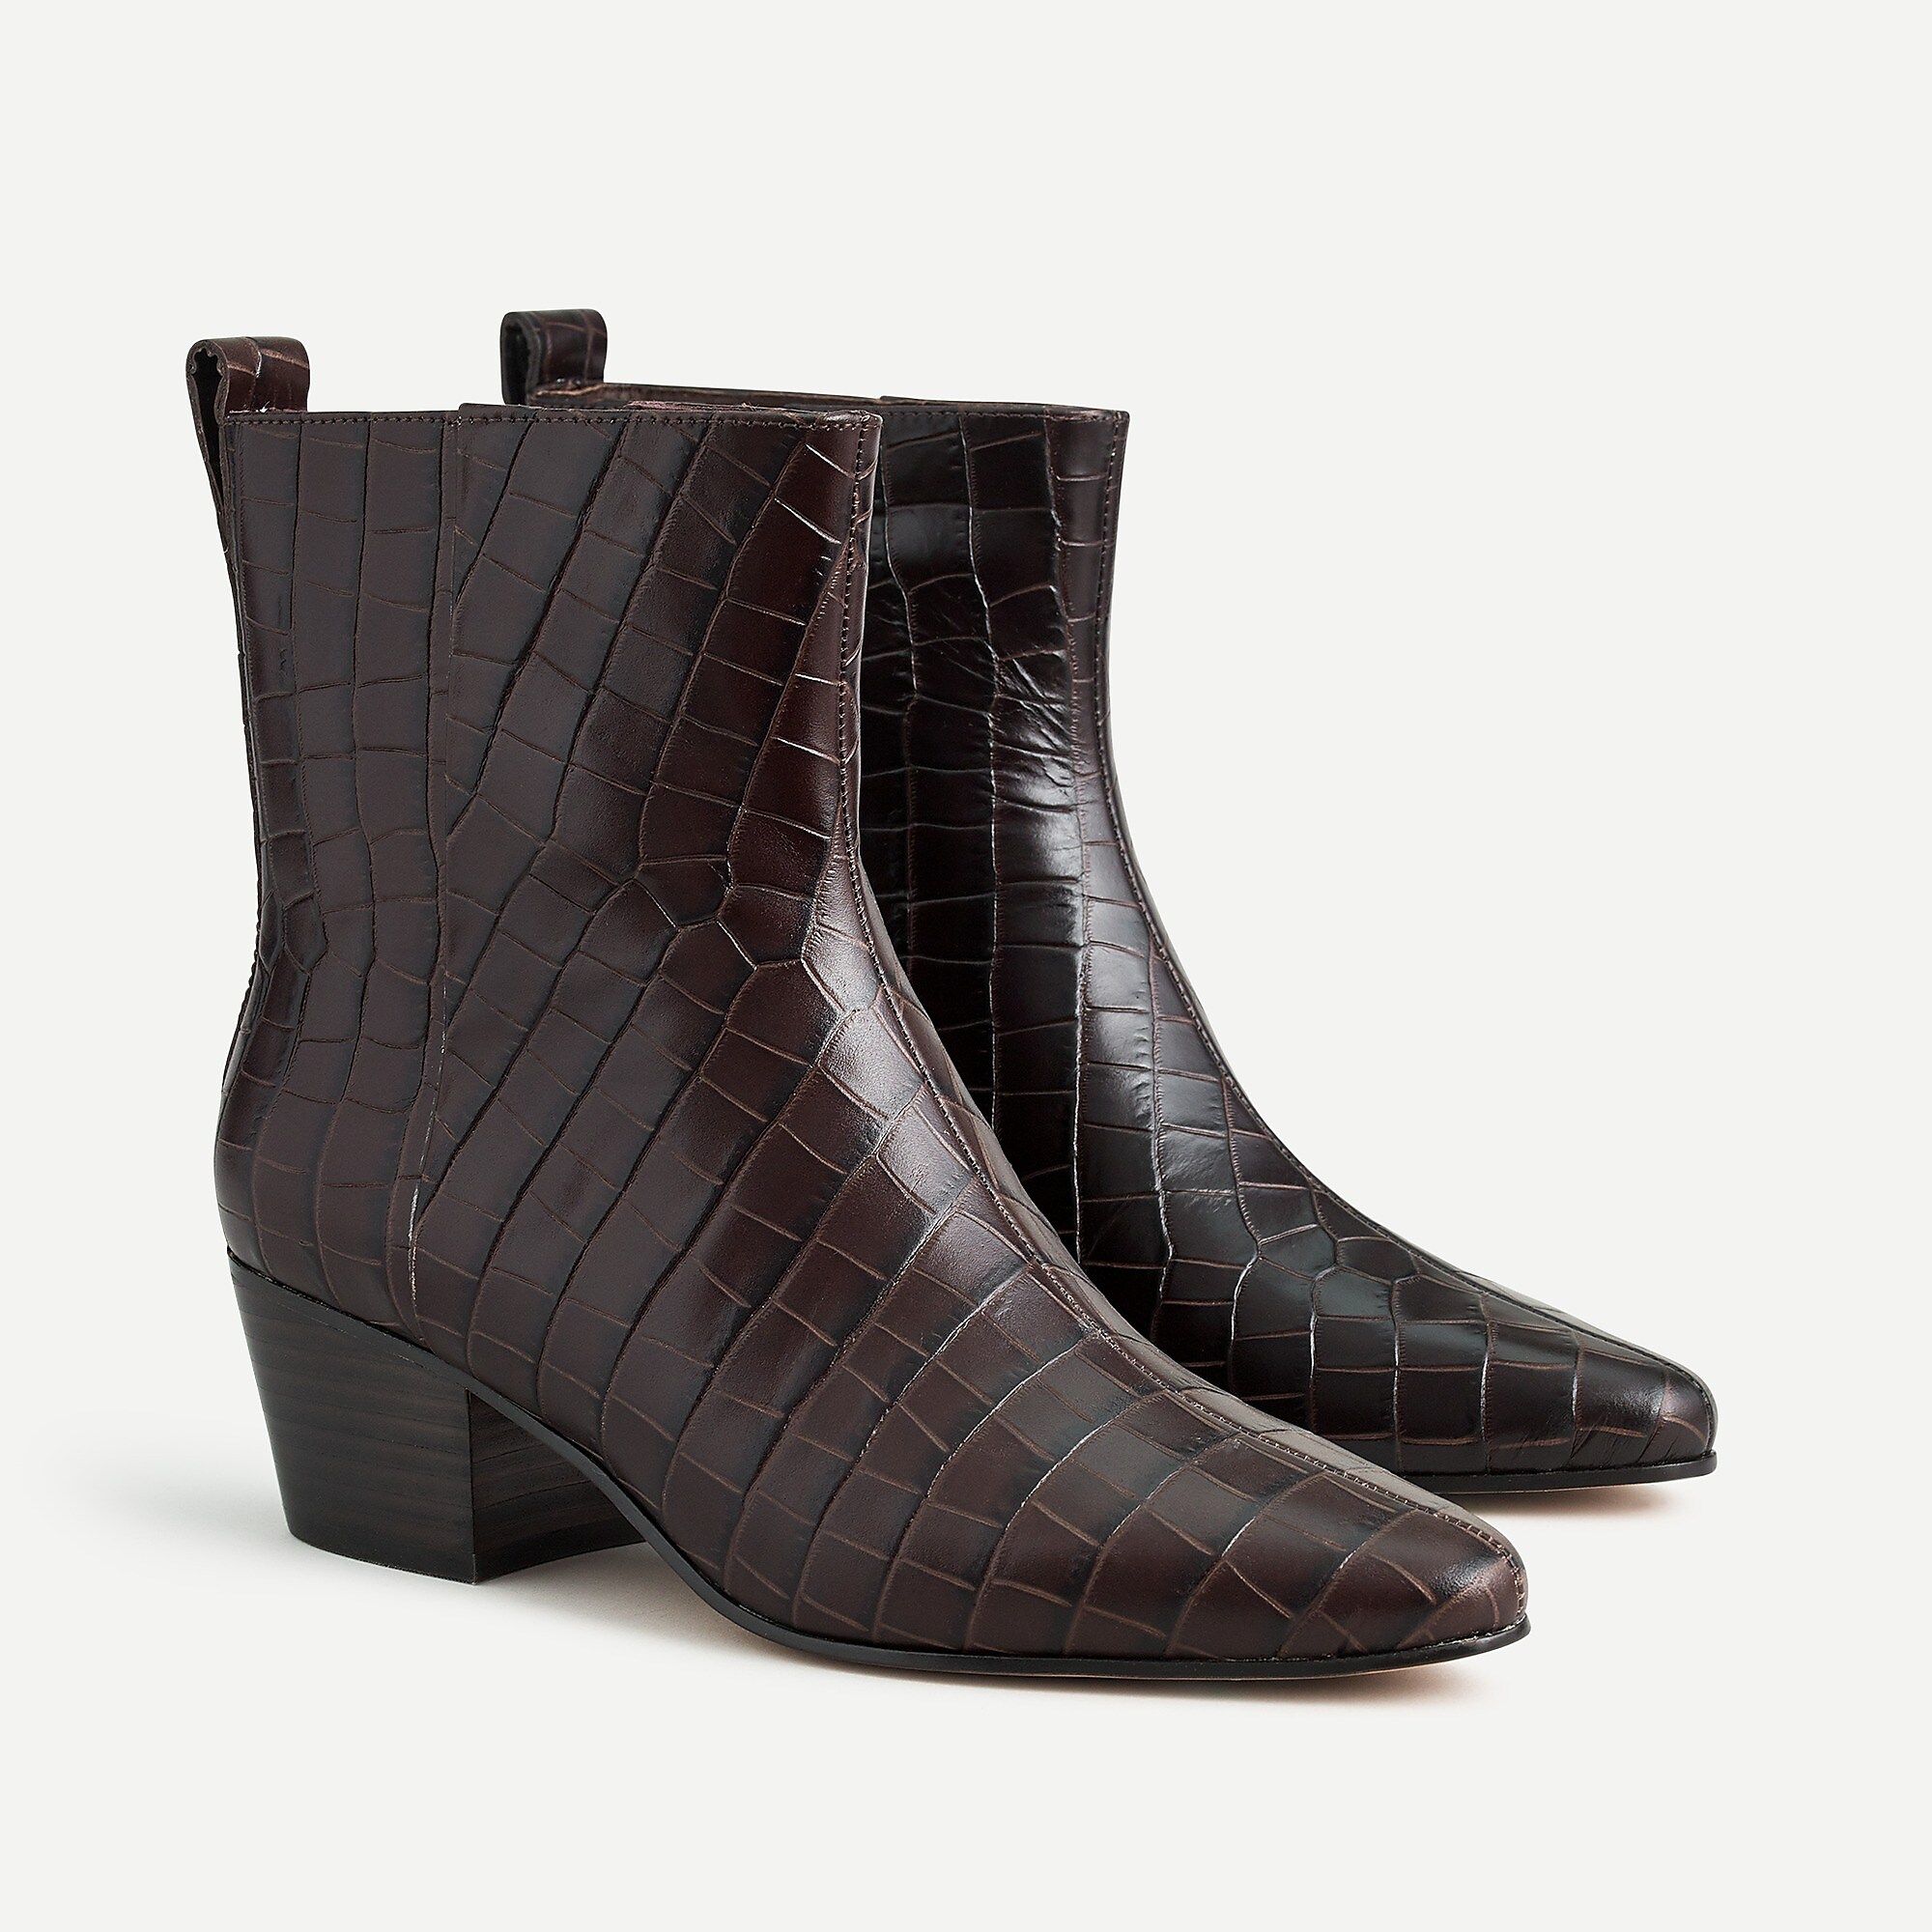 Leather western boots | J.Crew US